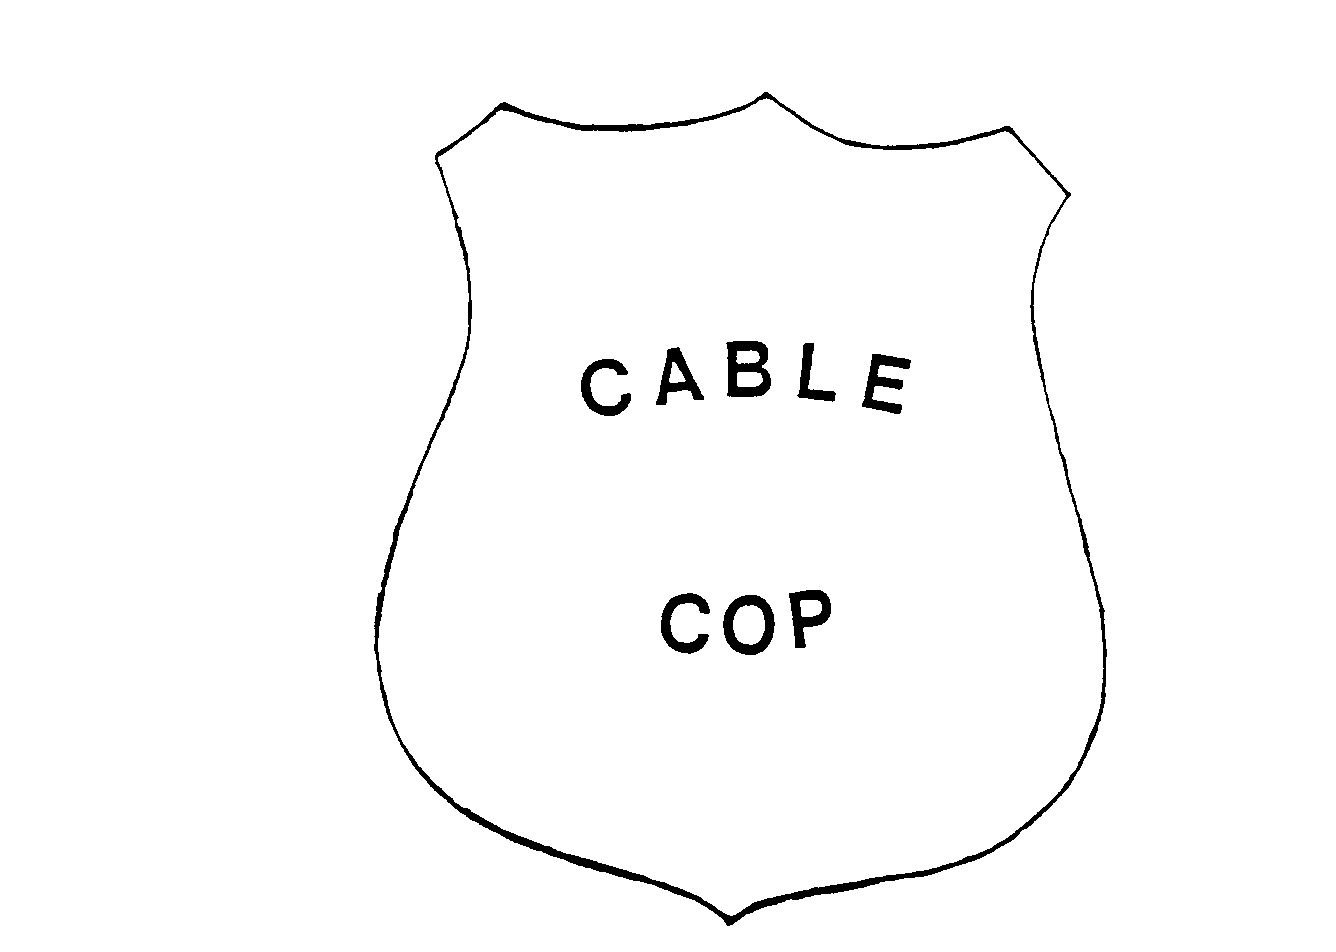  CABLE COP